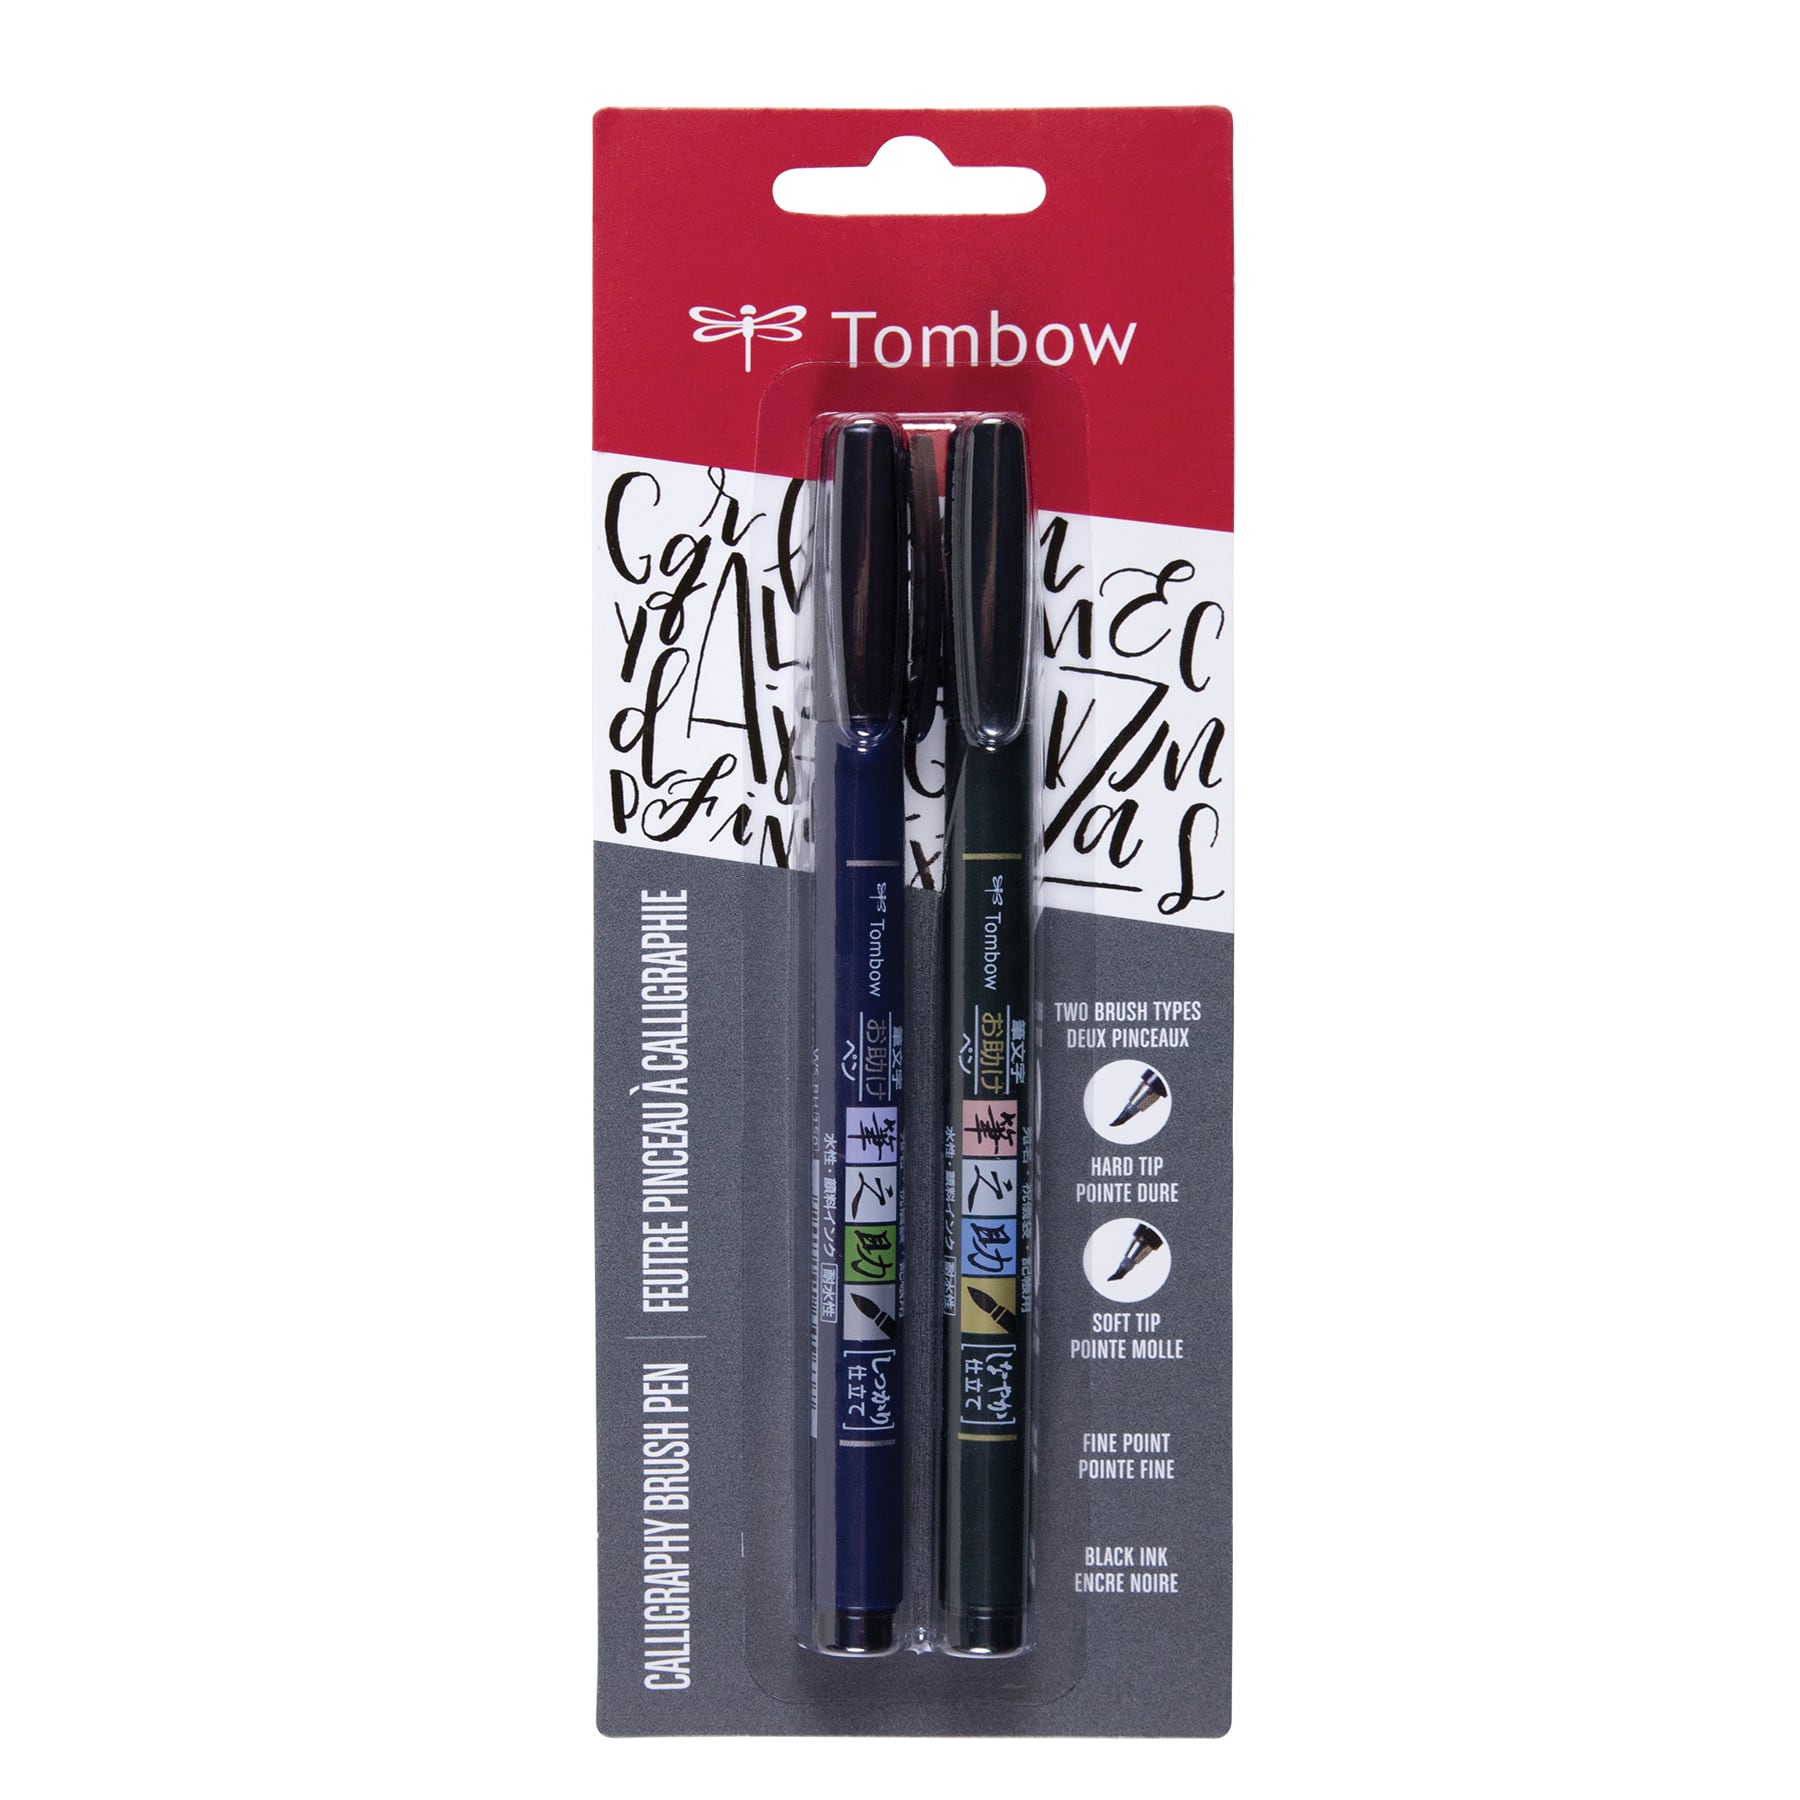 Double-sided calligraphy marker purchased online and delivered to